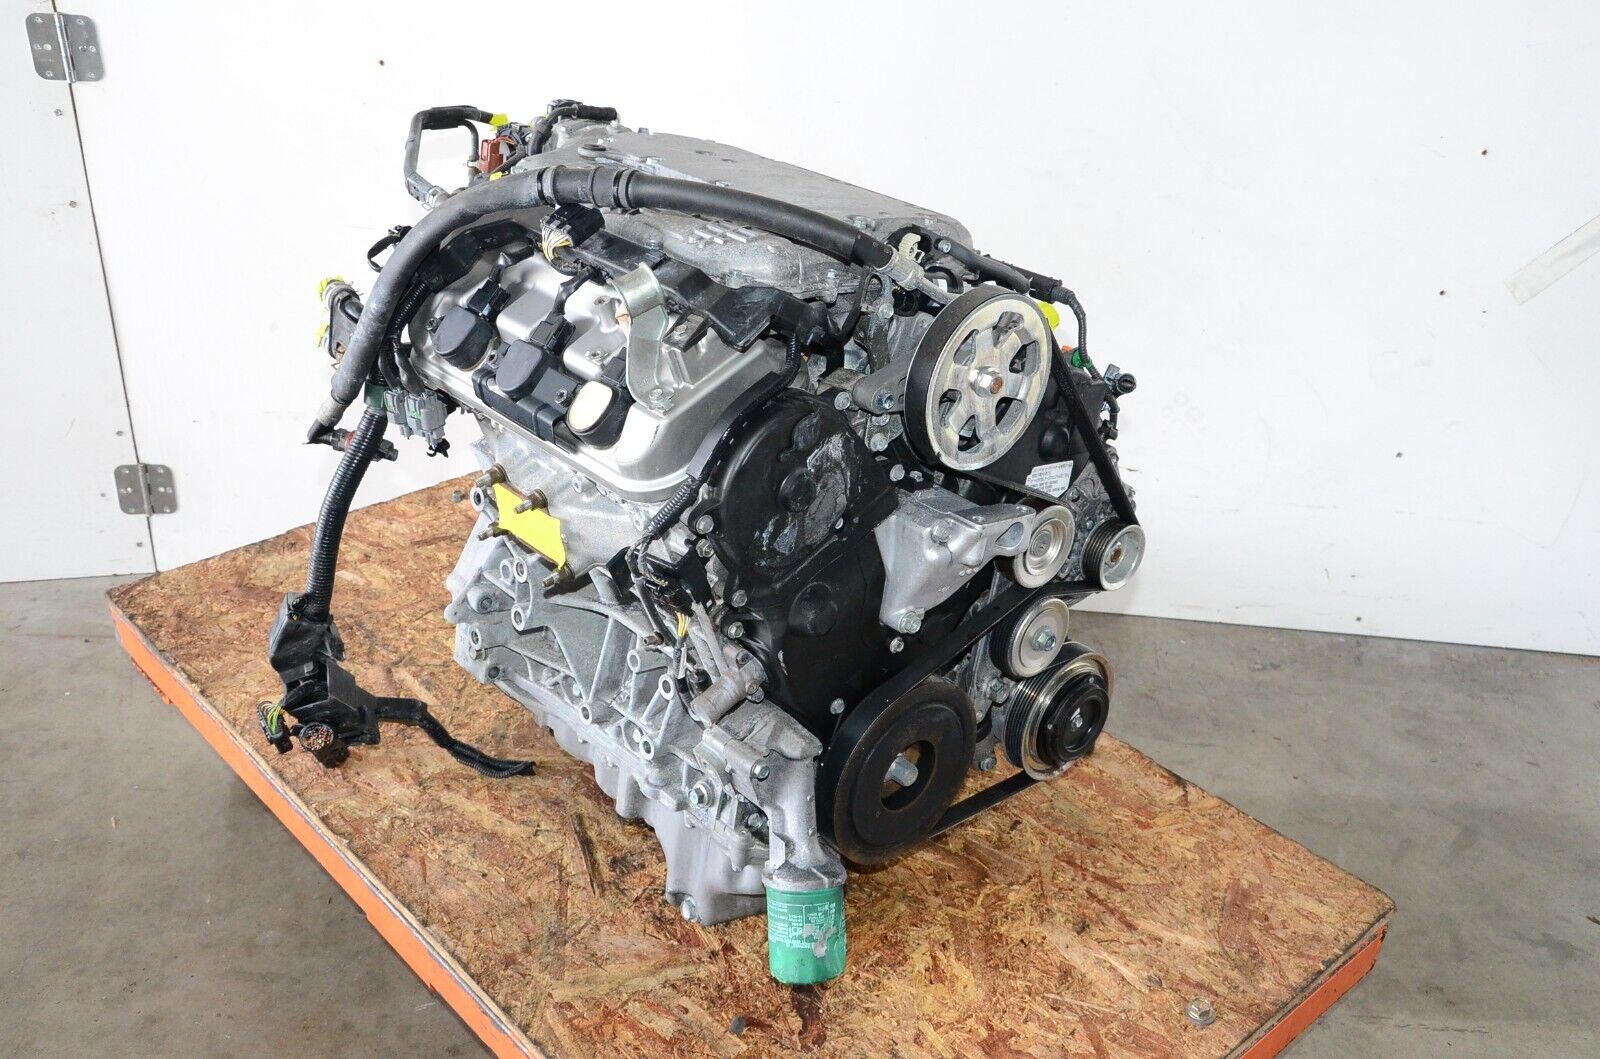 2007 to 2009 Acura MDX 3.5L V6 Engines